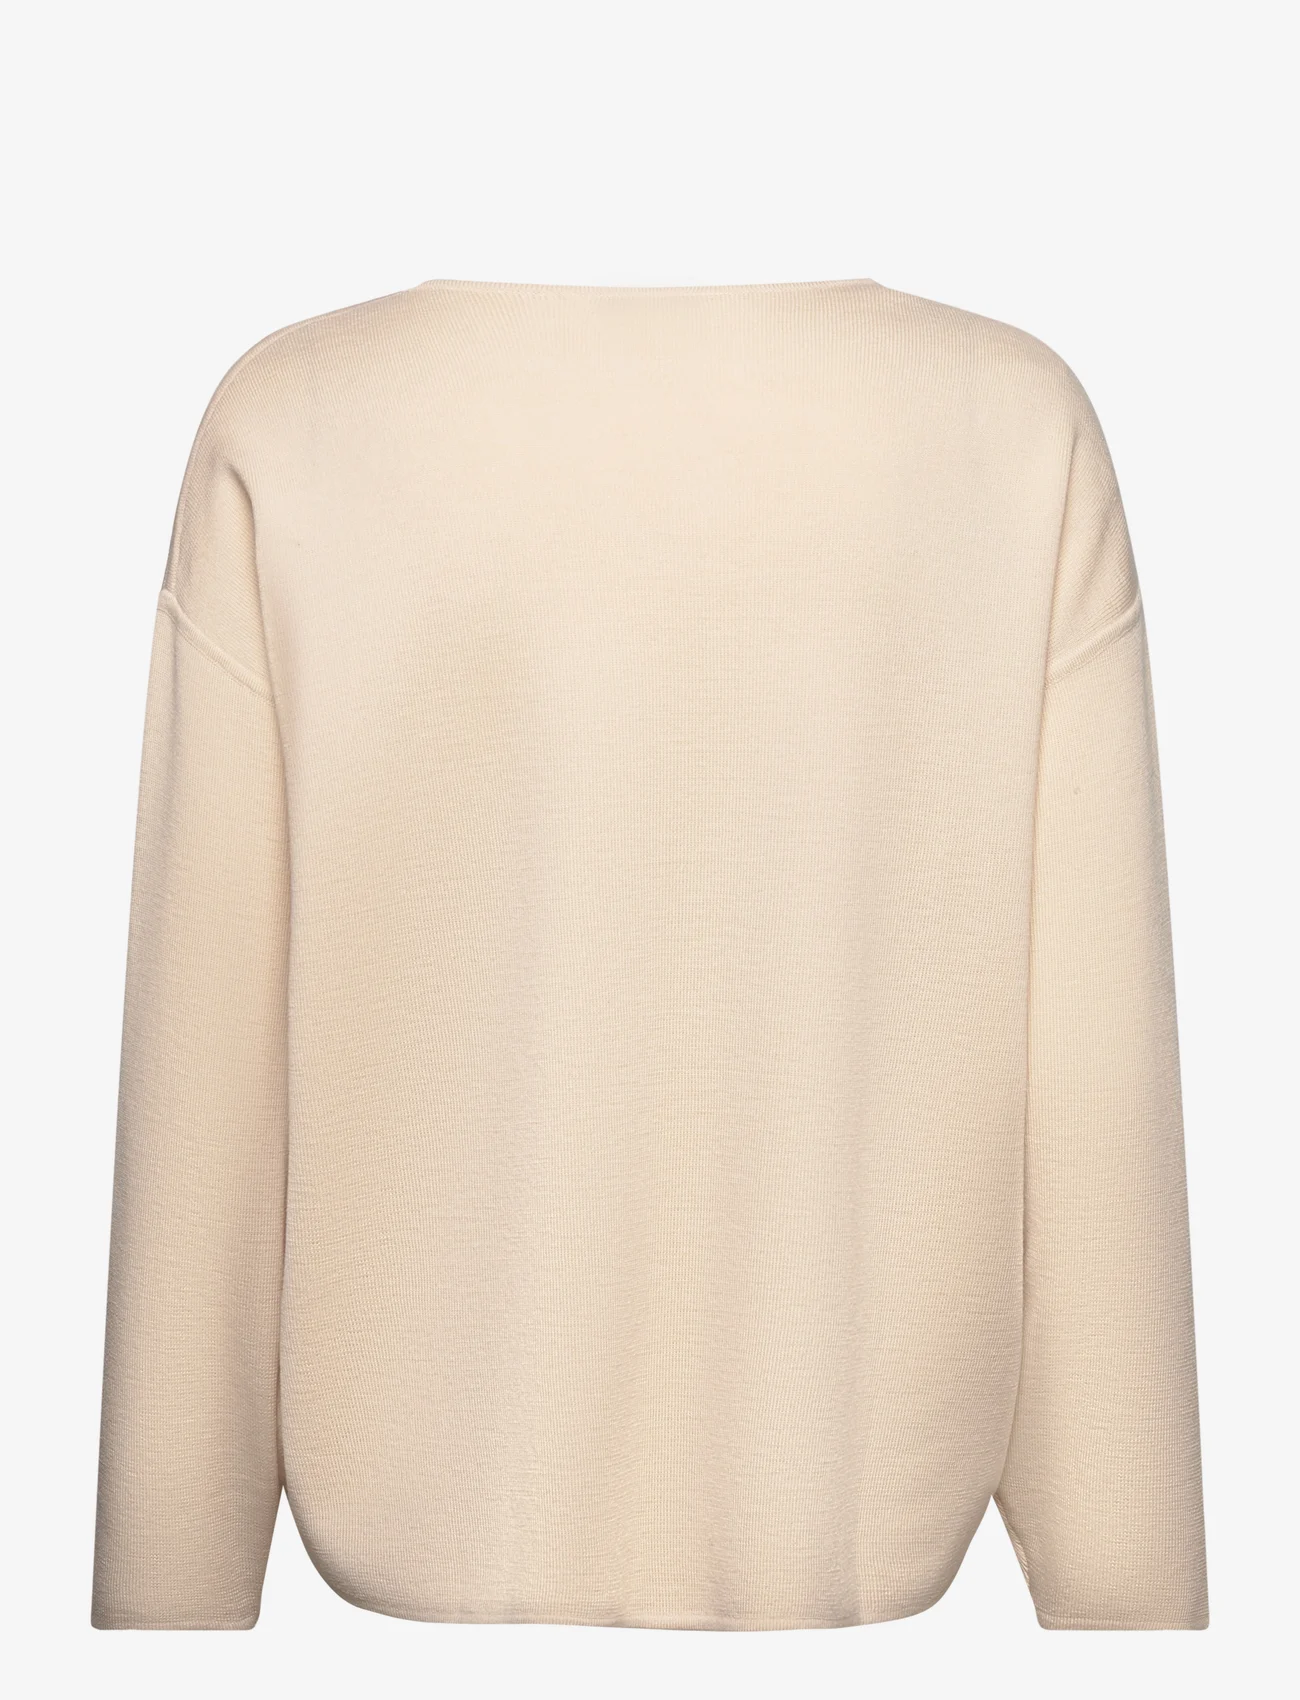 Balmuir - Melody sweater - pullover - almond - 1